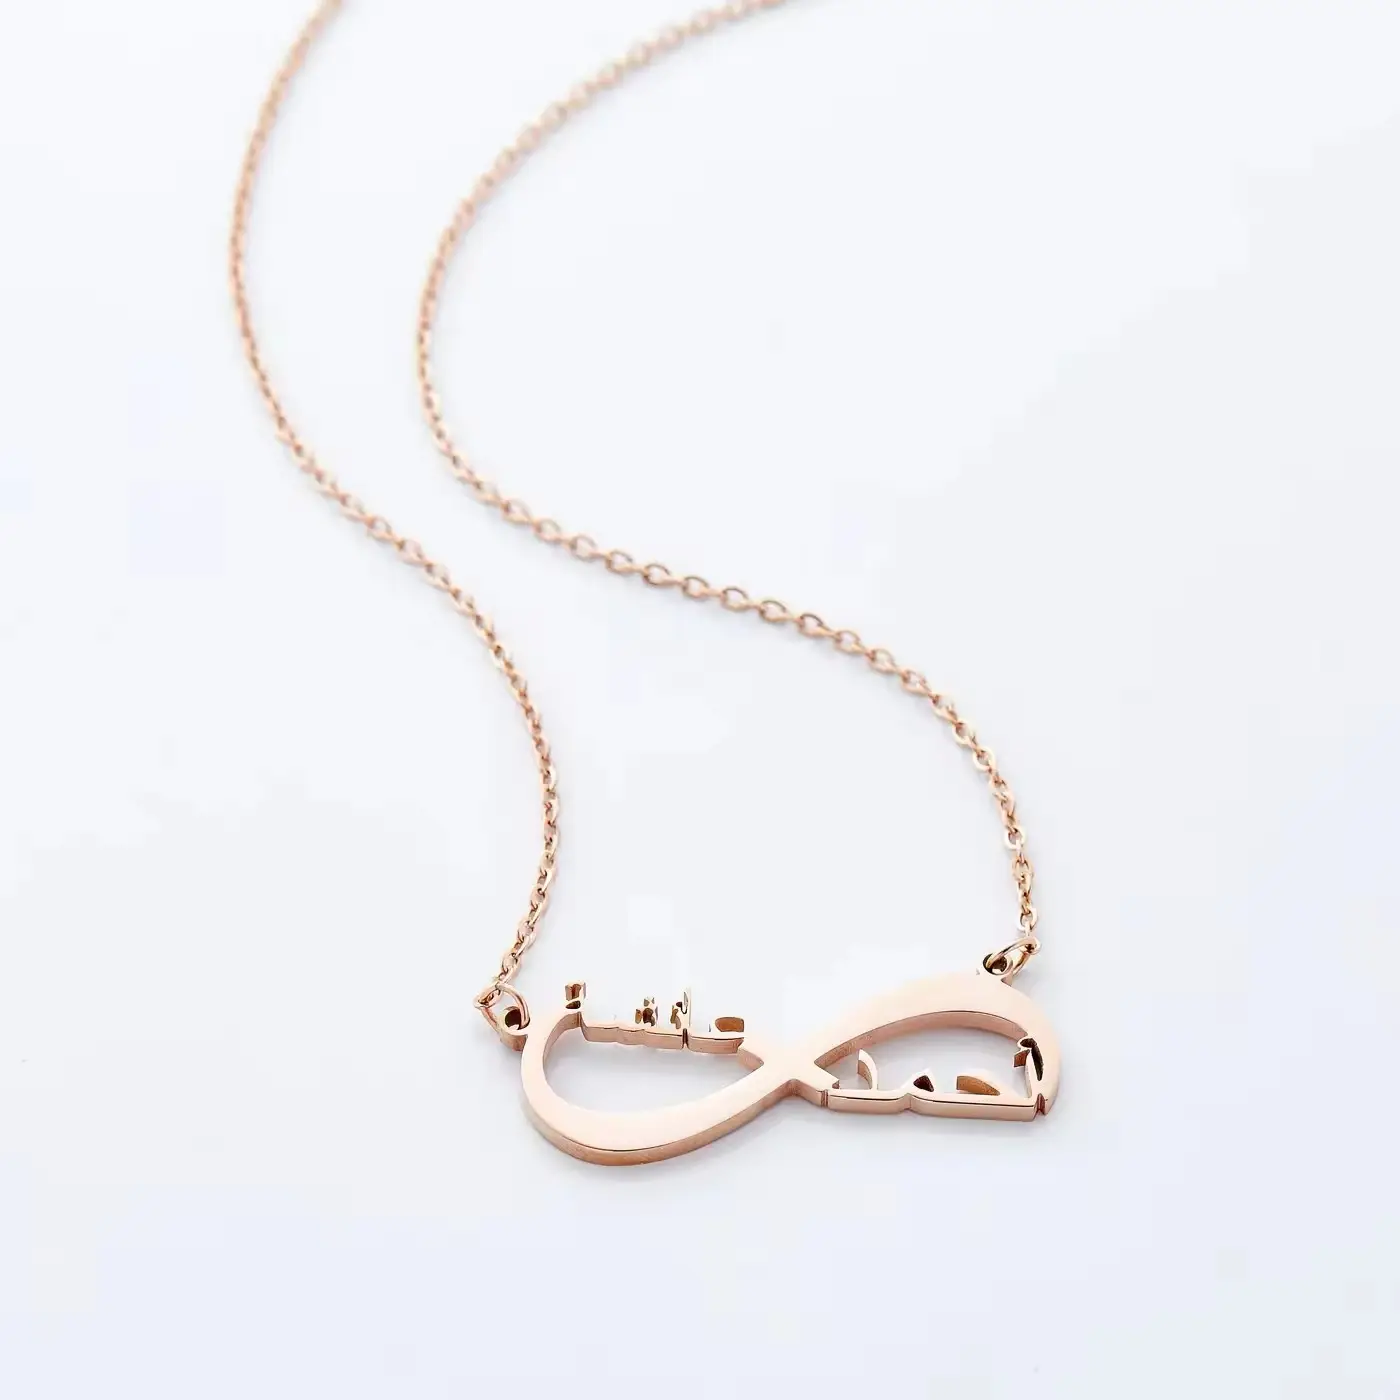 Personalized girls name necklace letter necklace initial infinity Arabic calligraphy pendant necklace jewelry factory